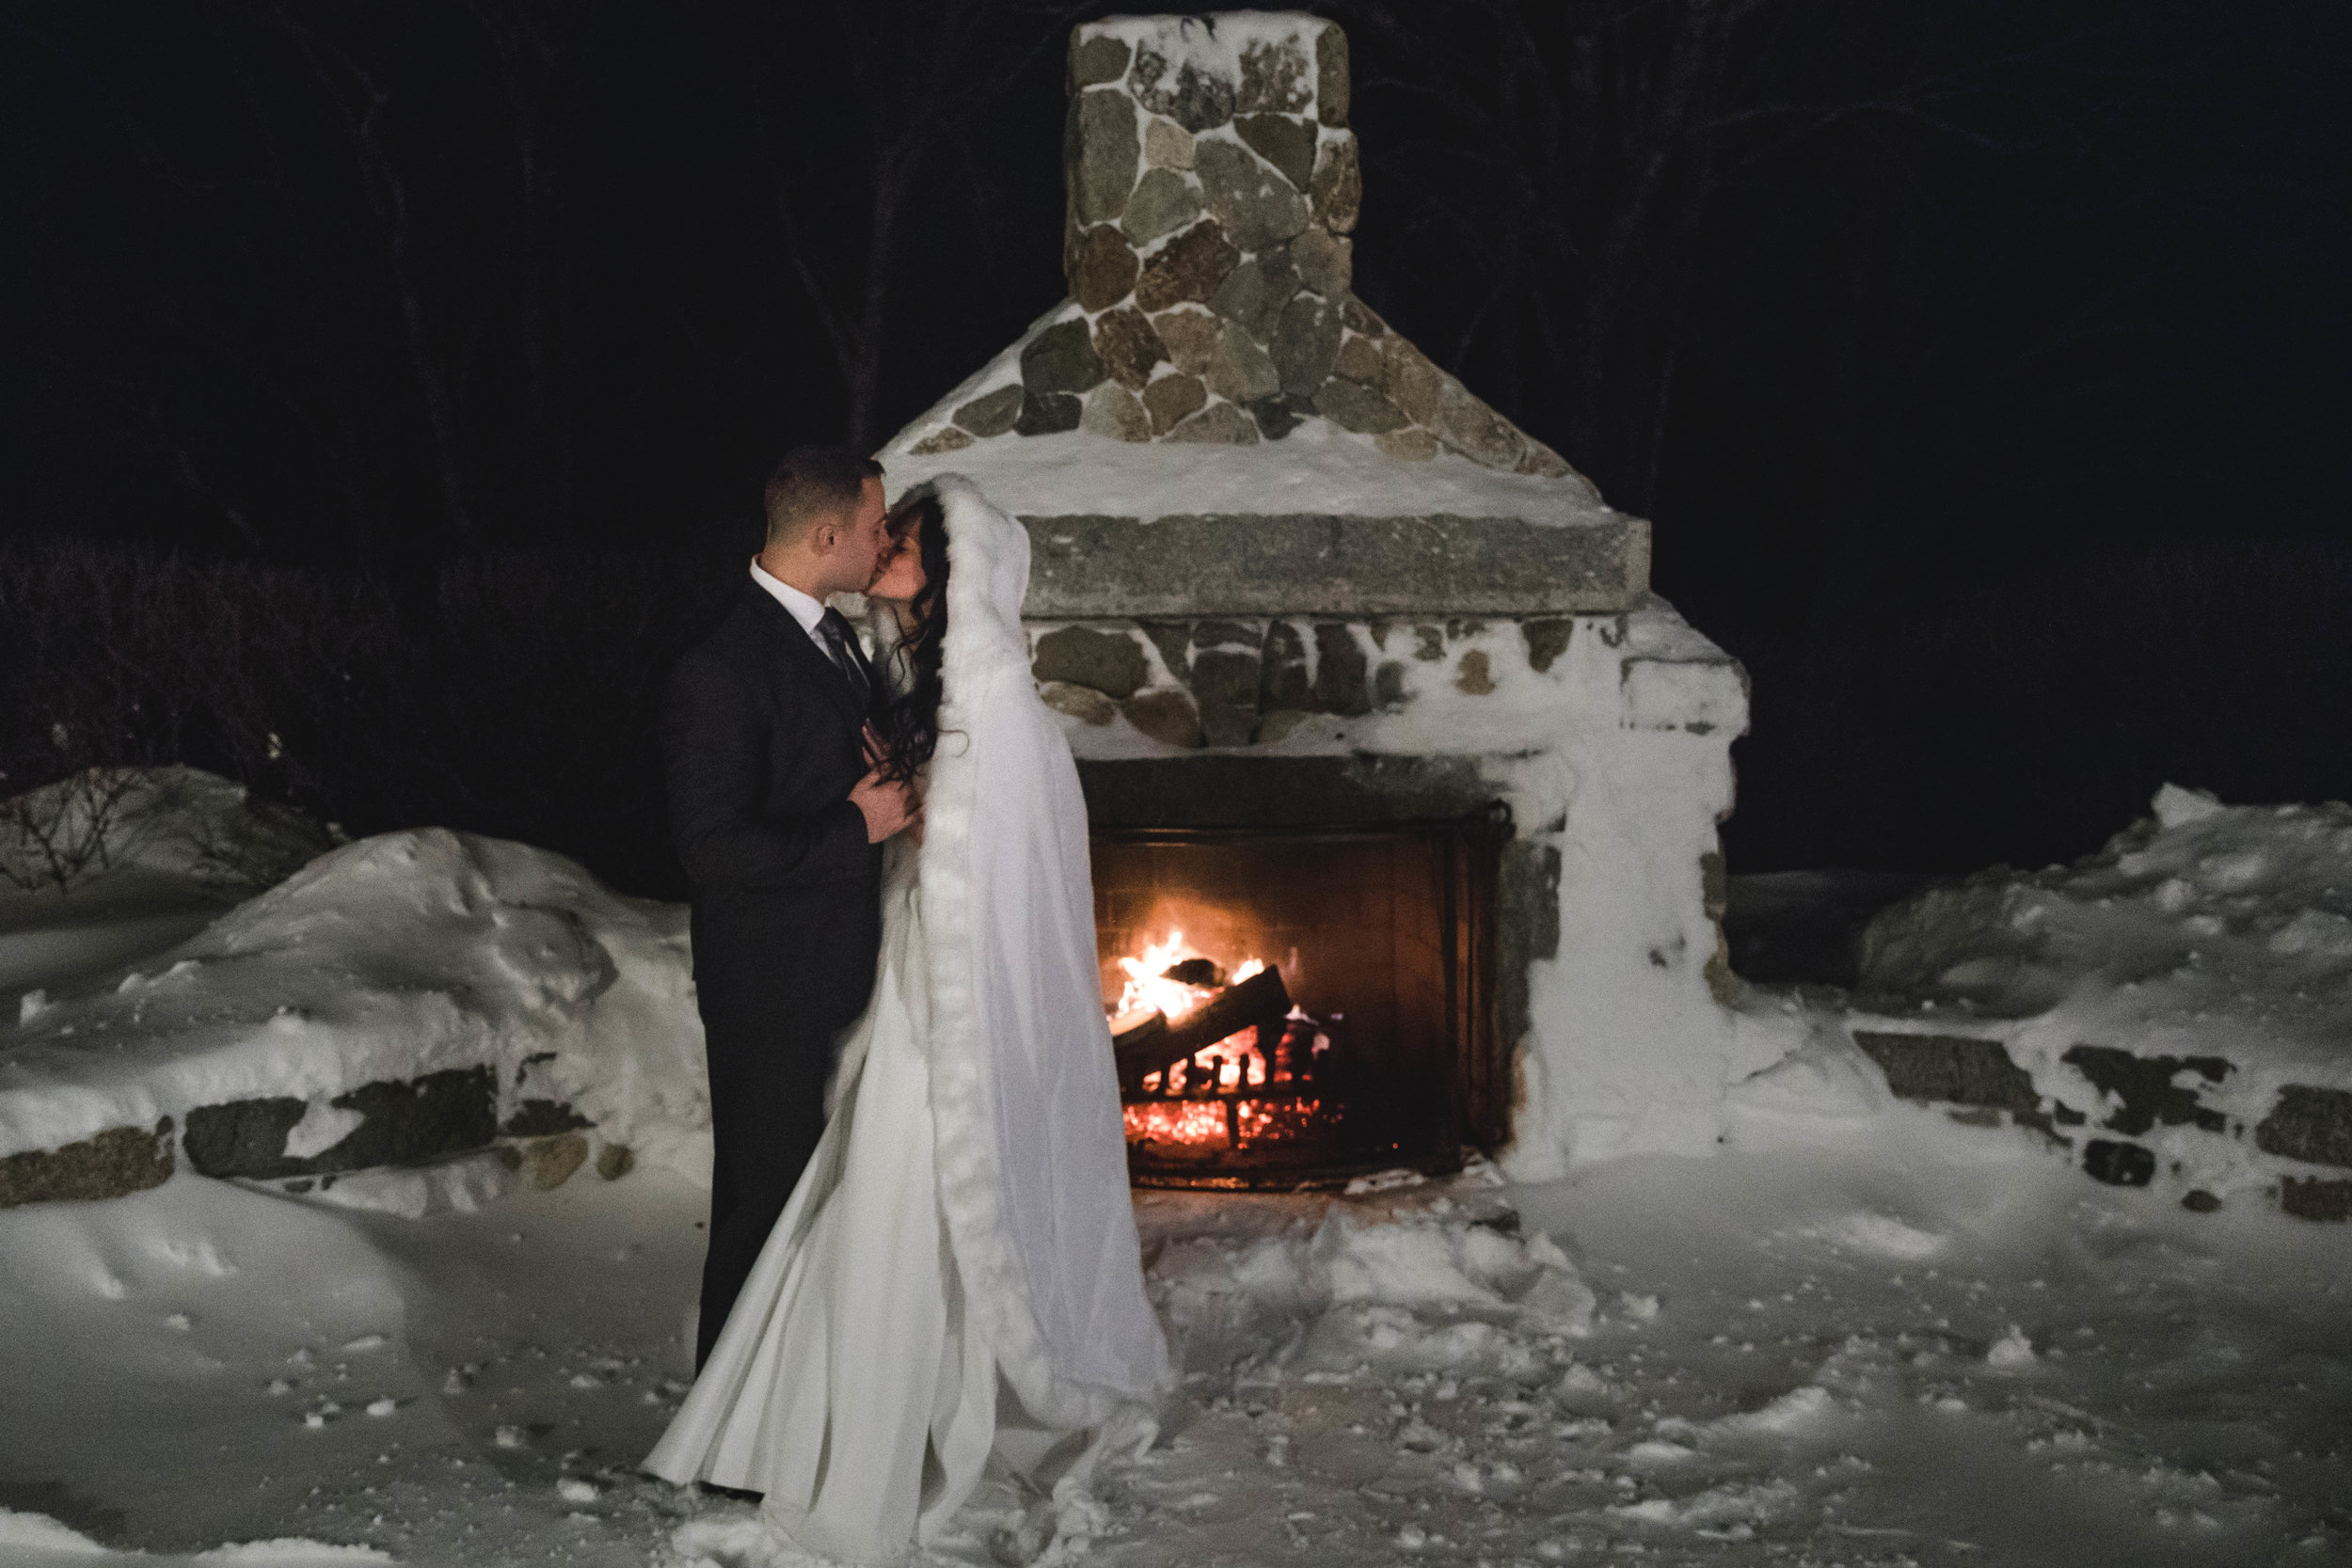 harrington farm outdoor fireplace at winter wedding with bride and groom